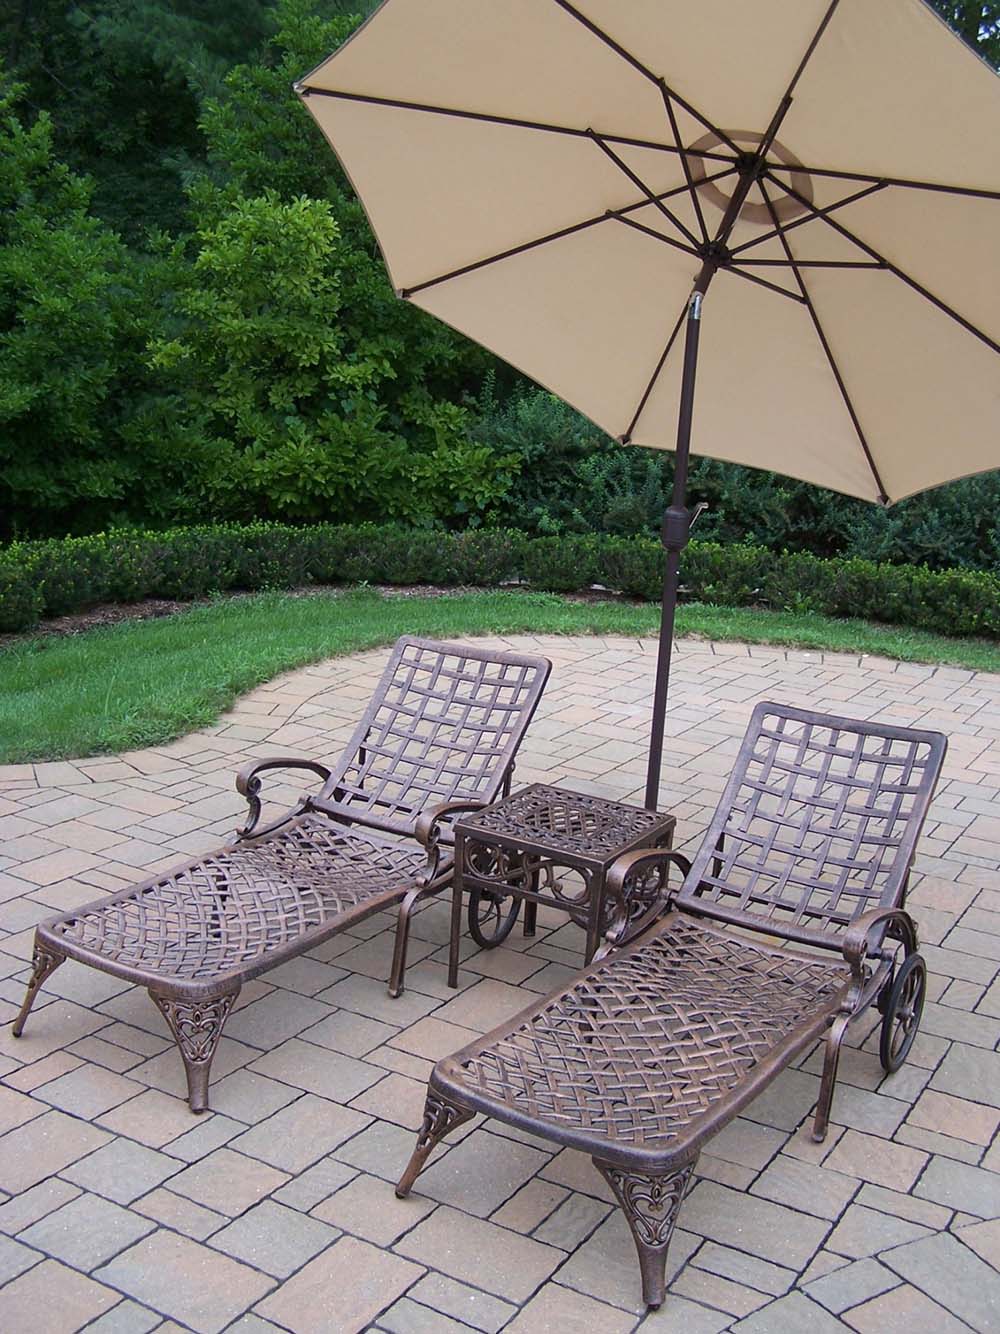 Elite Chaise Lounges: Side Table, Beige Umbrella, Stand